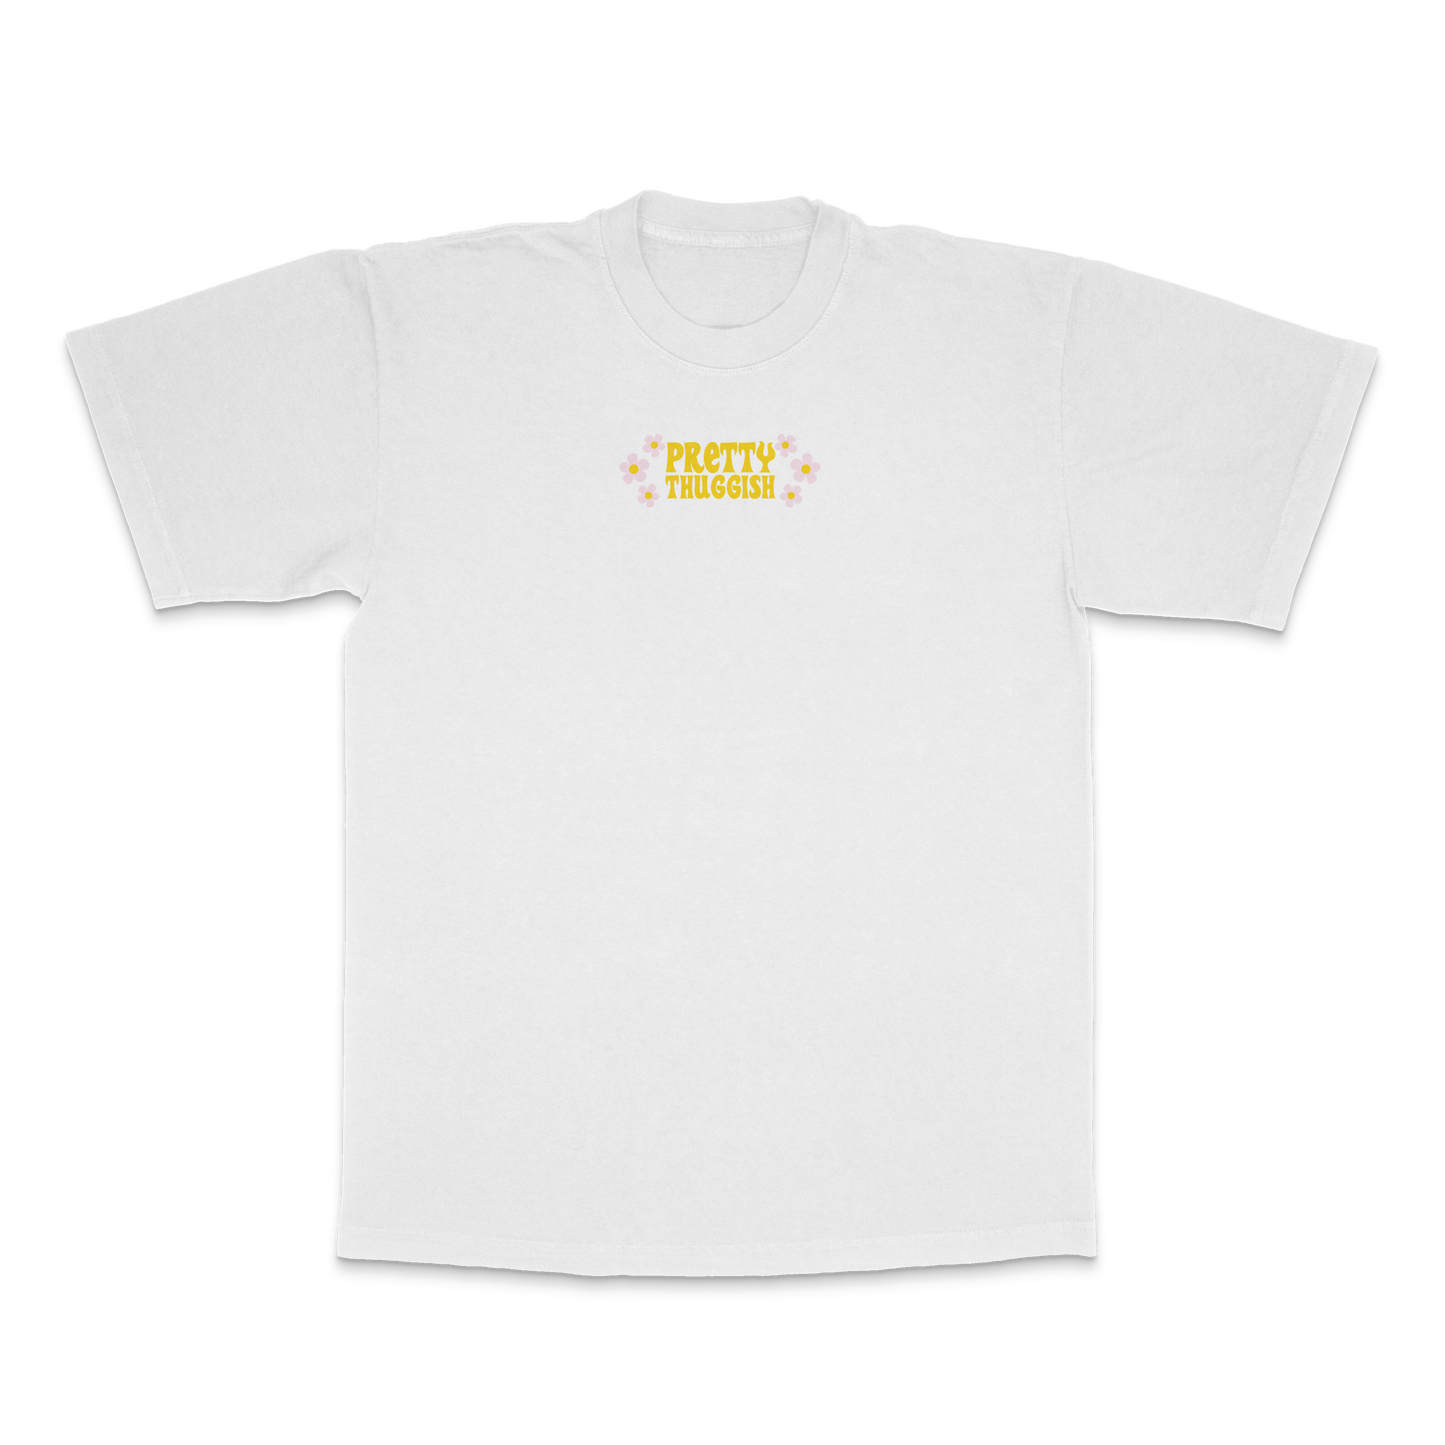 Good Things Are Coming Tee- White